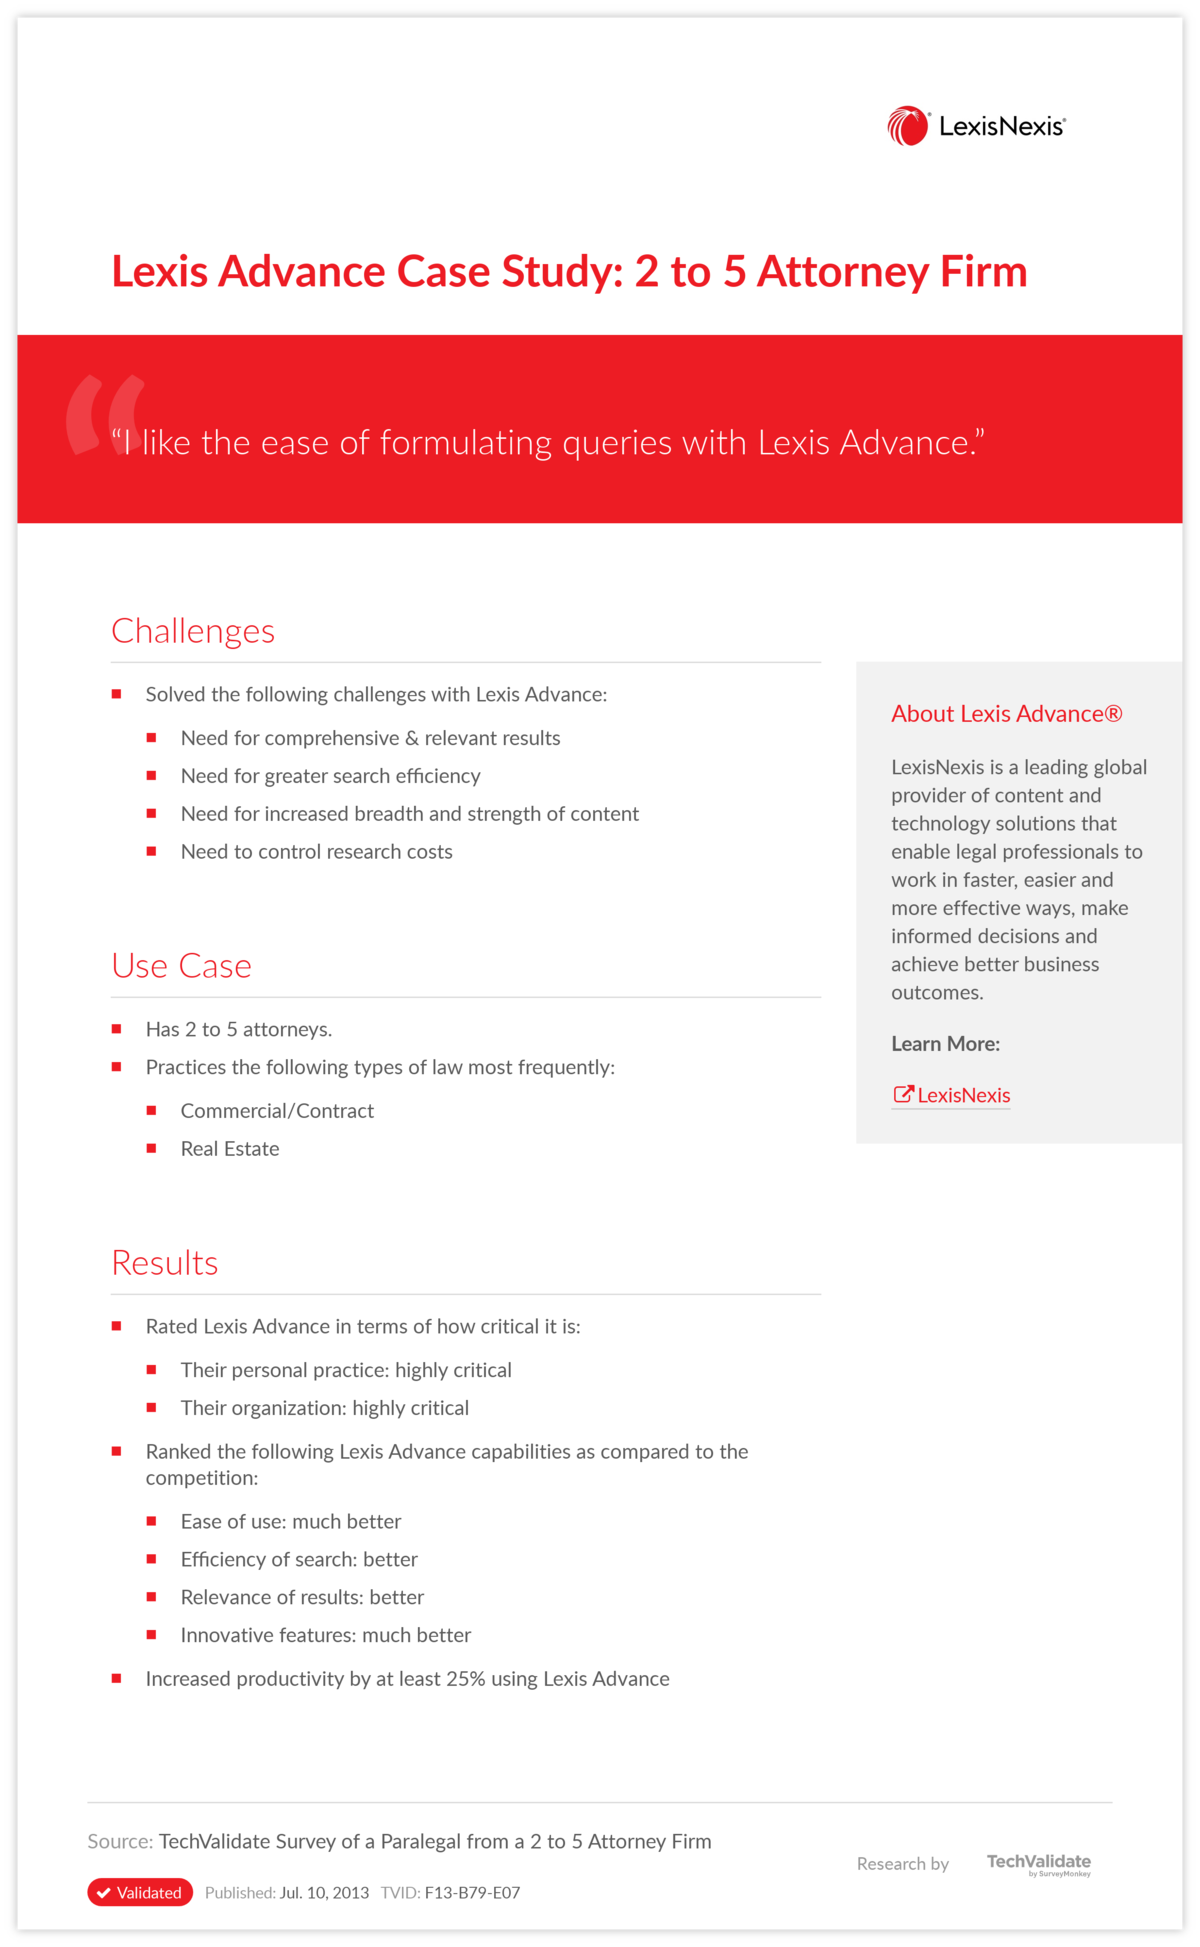 Lexis Advance Case Study: 2 to 5 Attorney Firm